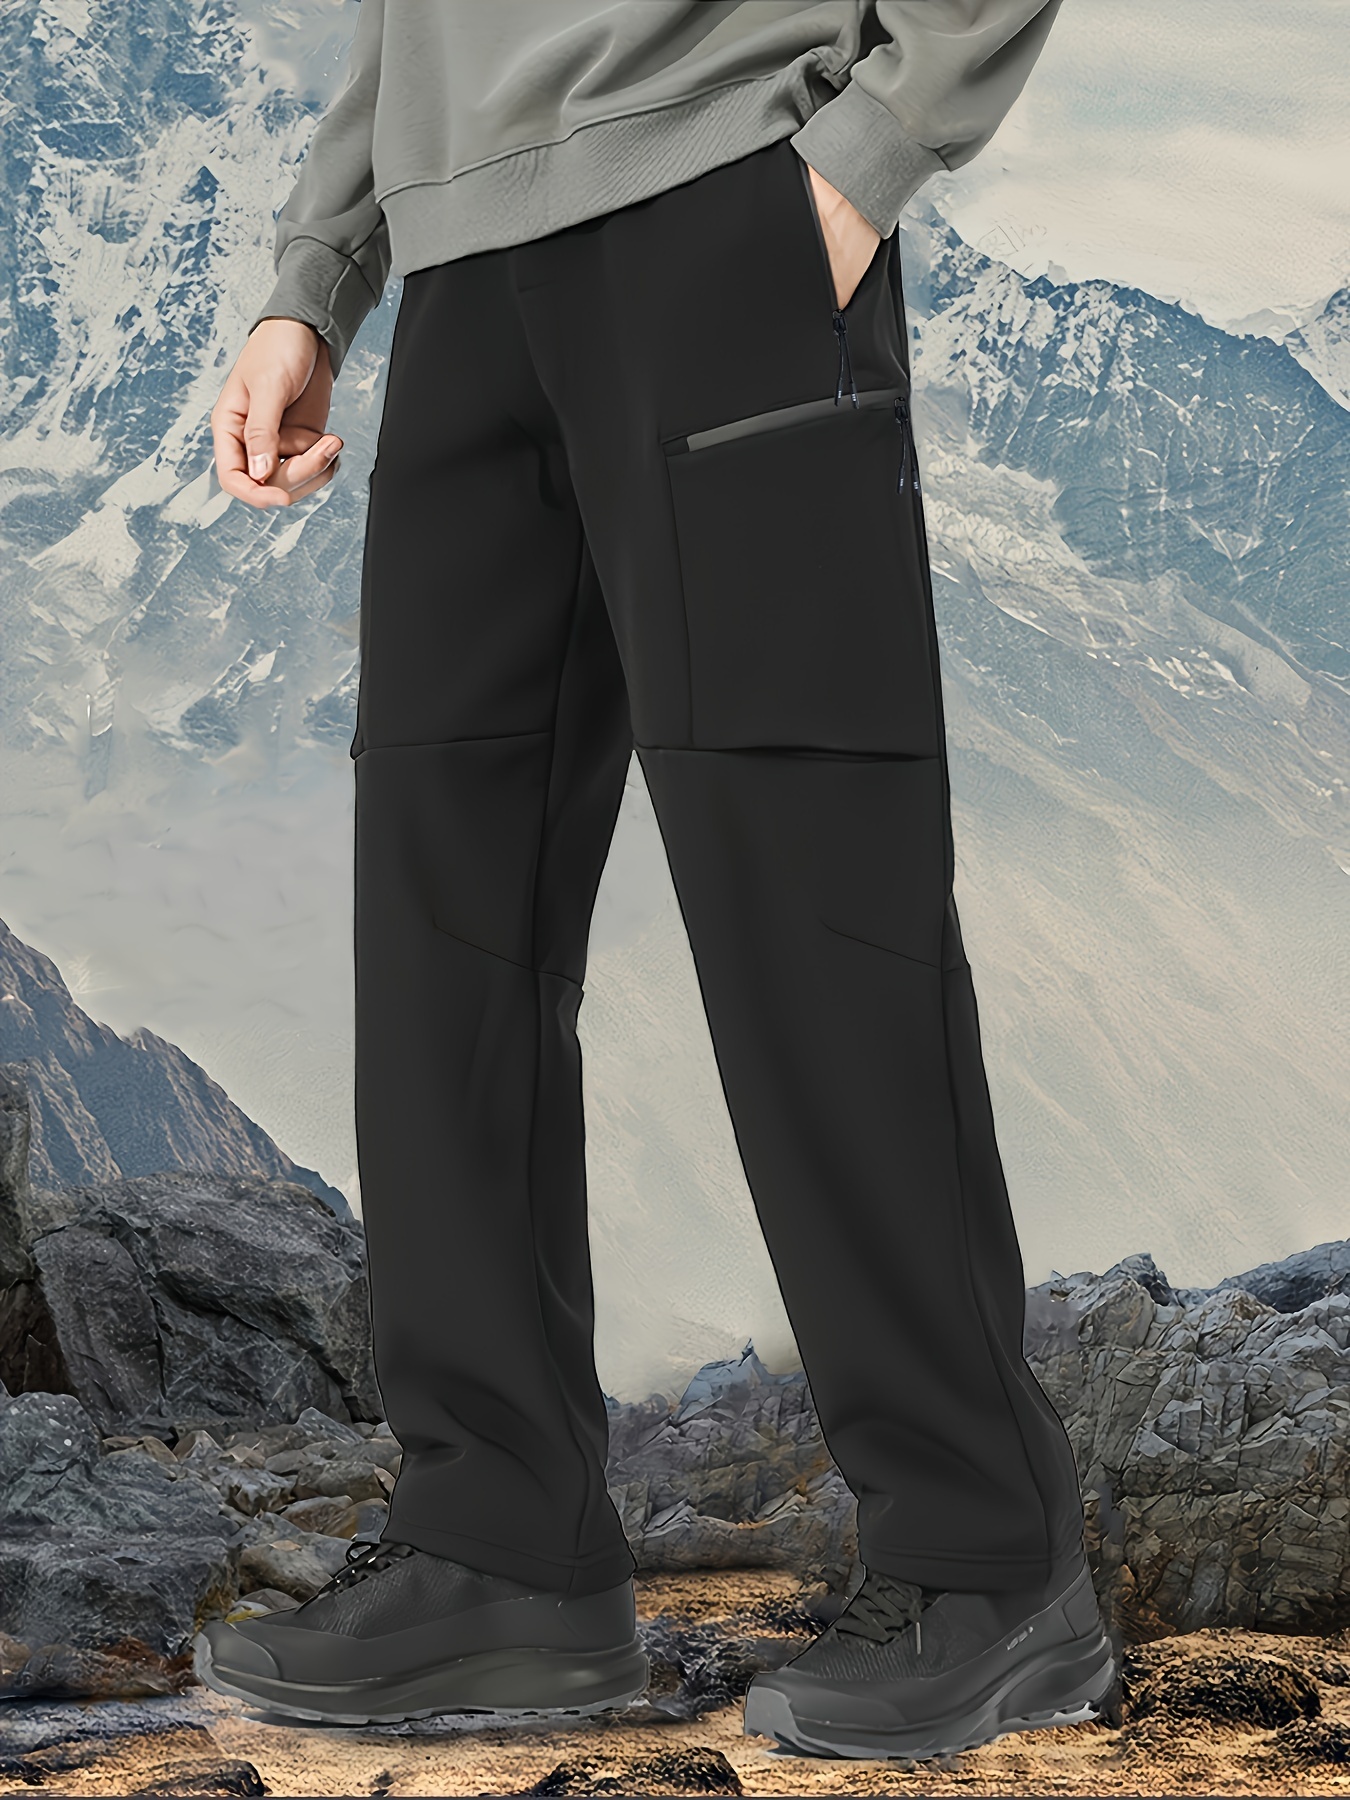 mens multi pocket pants comfy active slightly stretch water resistant trousers for outdoor activities details 4